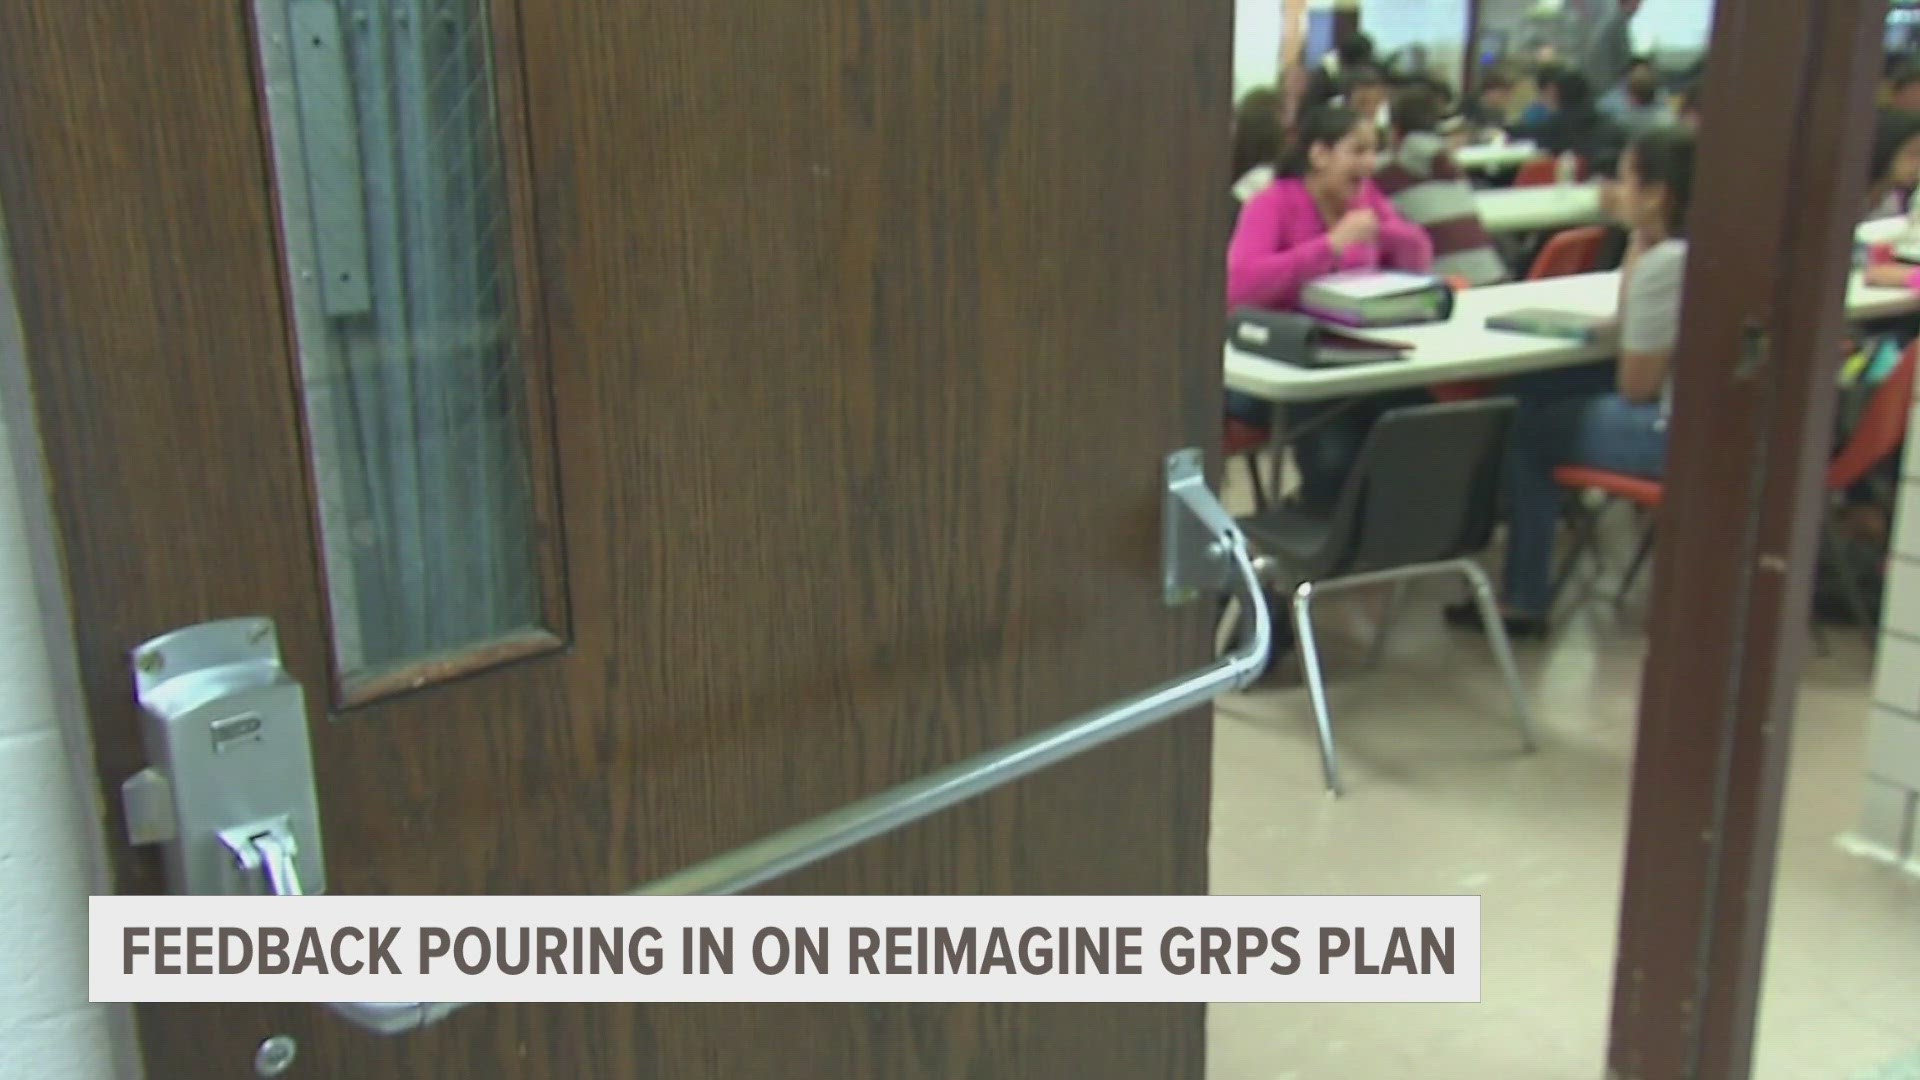 Parents are voicing their opinions on the Reimagine GRPS plan.